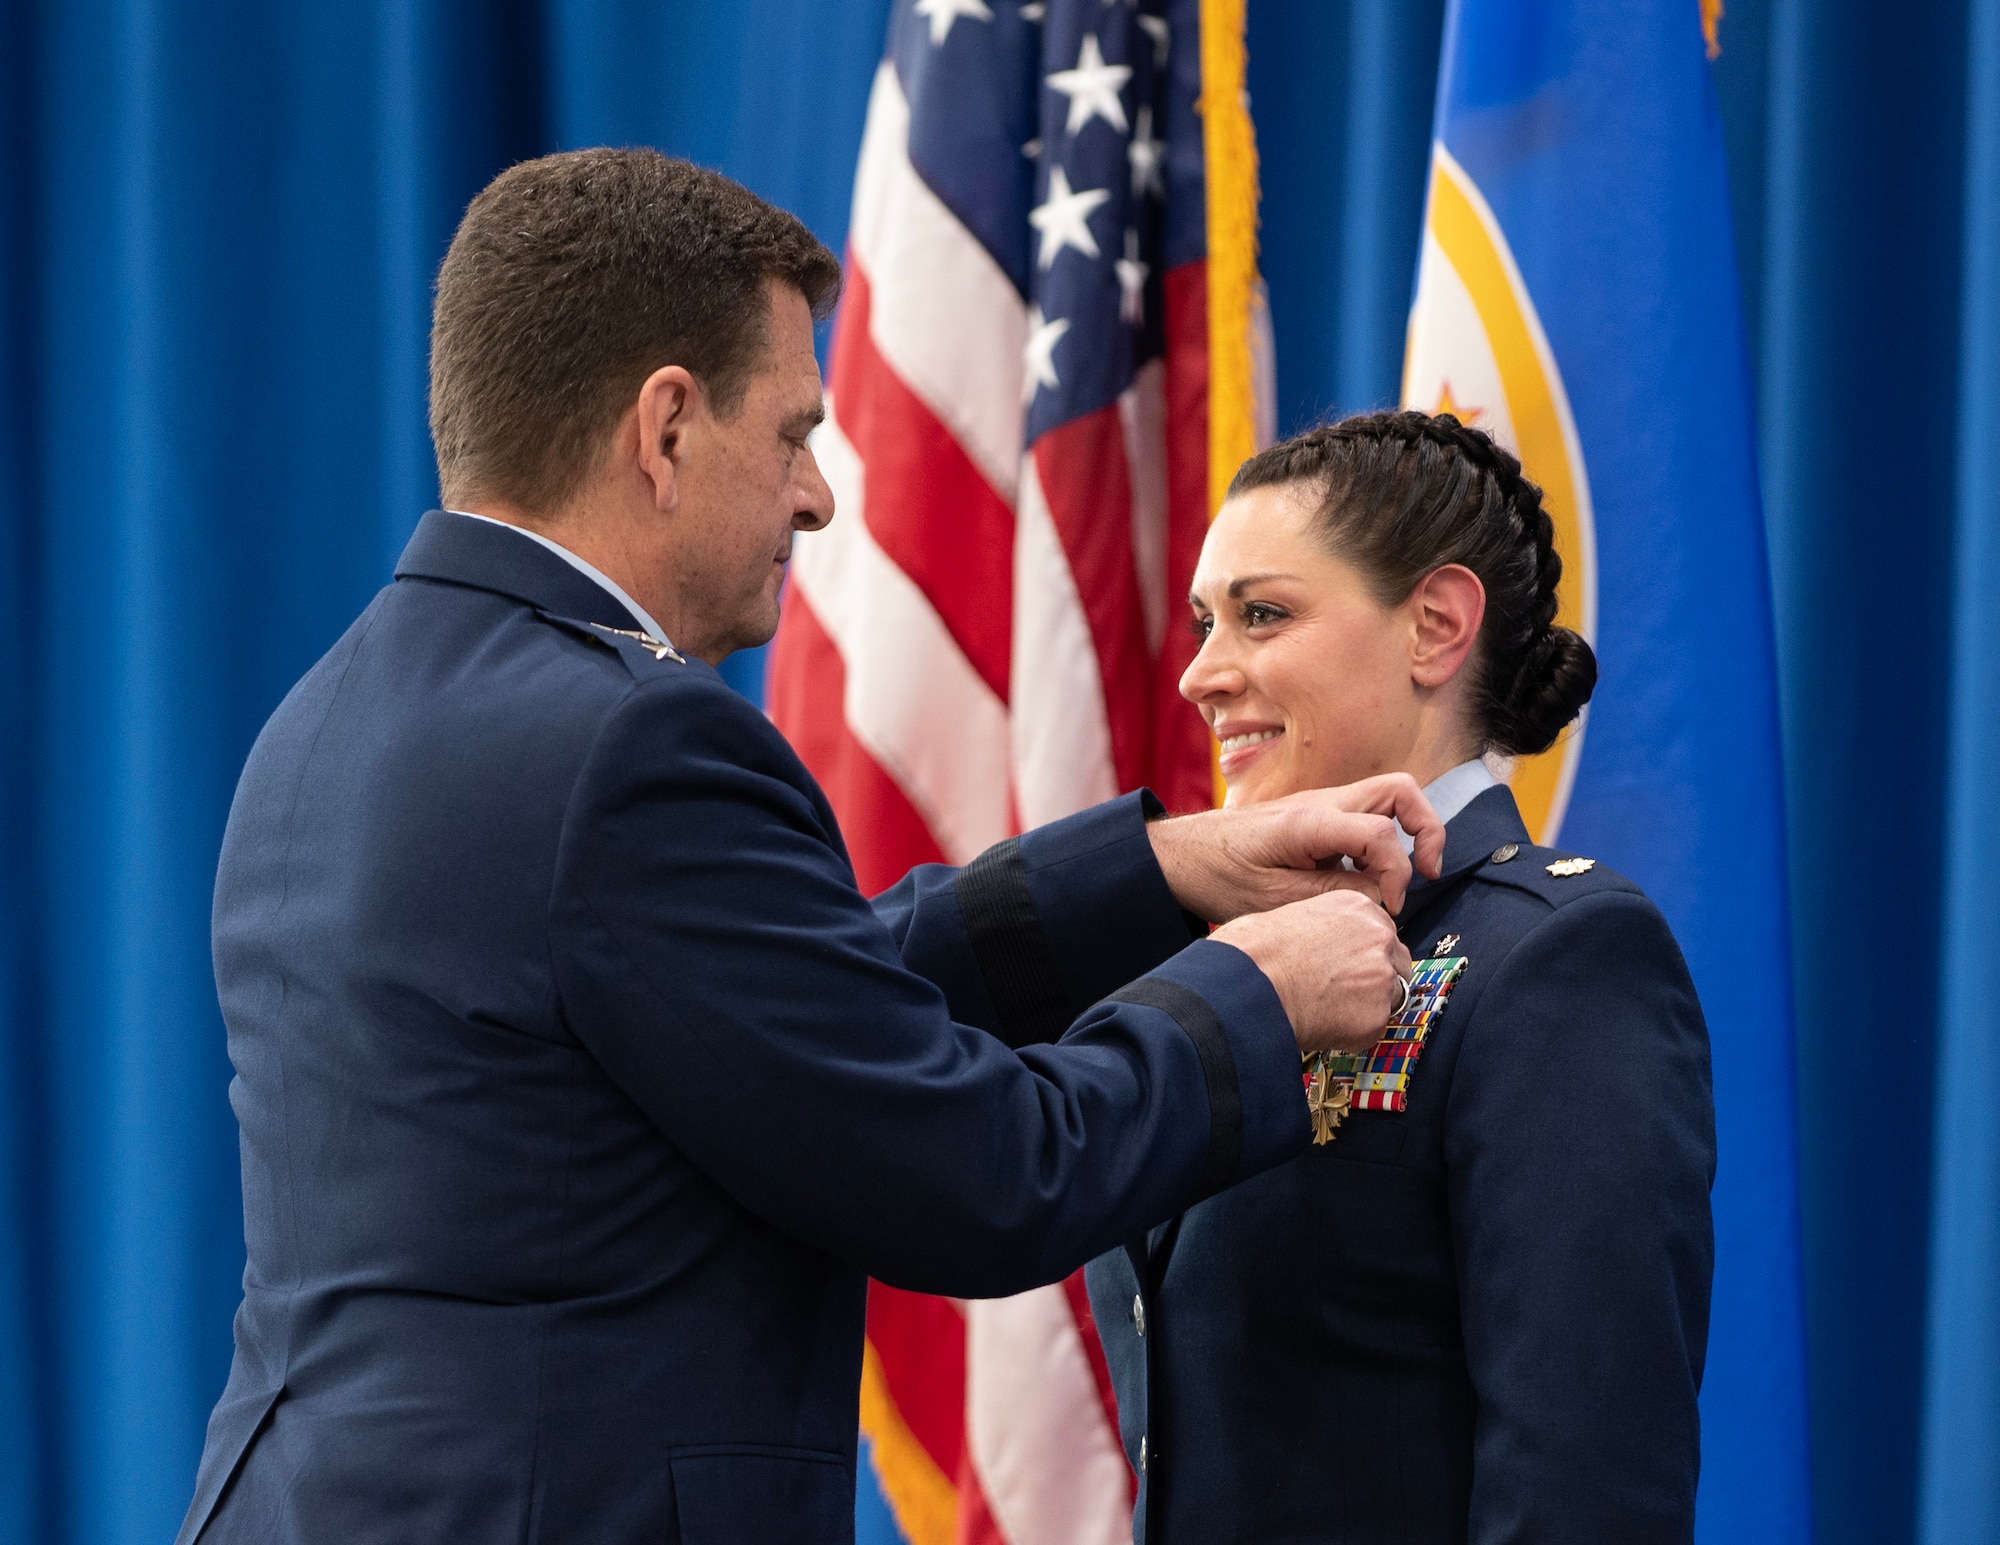 U.S. Air Force Lt. Gen. Michael A. Loh, Director of the Air National Guard, fastens the Distinguished Flying Cross onto Maj. Katie Lunning’s uniform in St. Paul, Minn., Jan. 7, 2023.